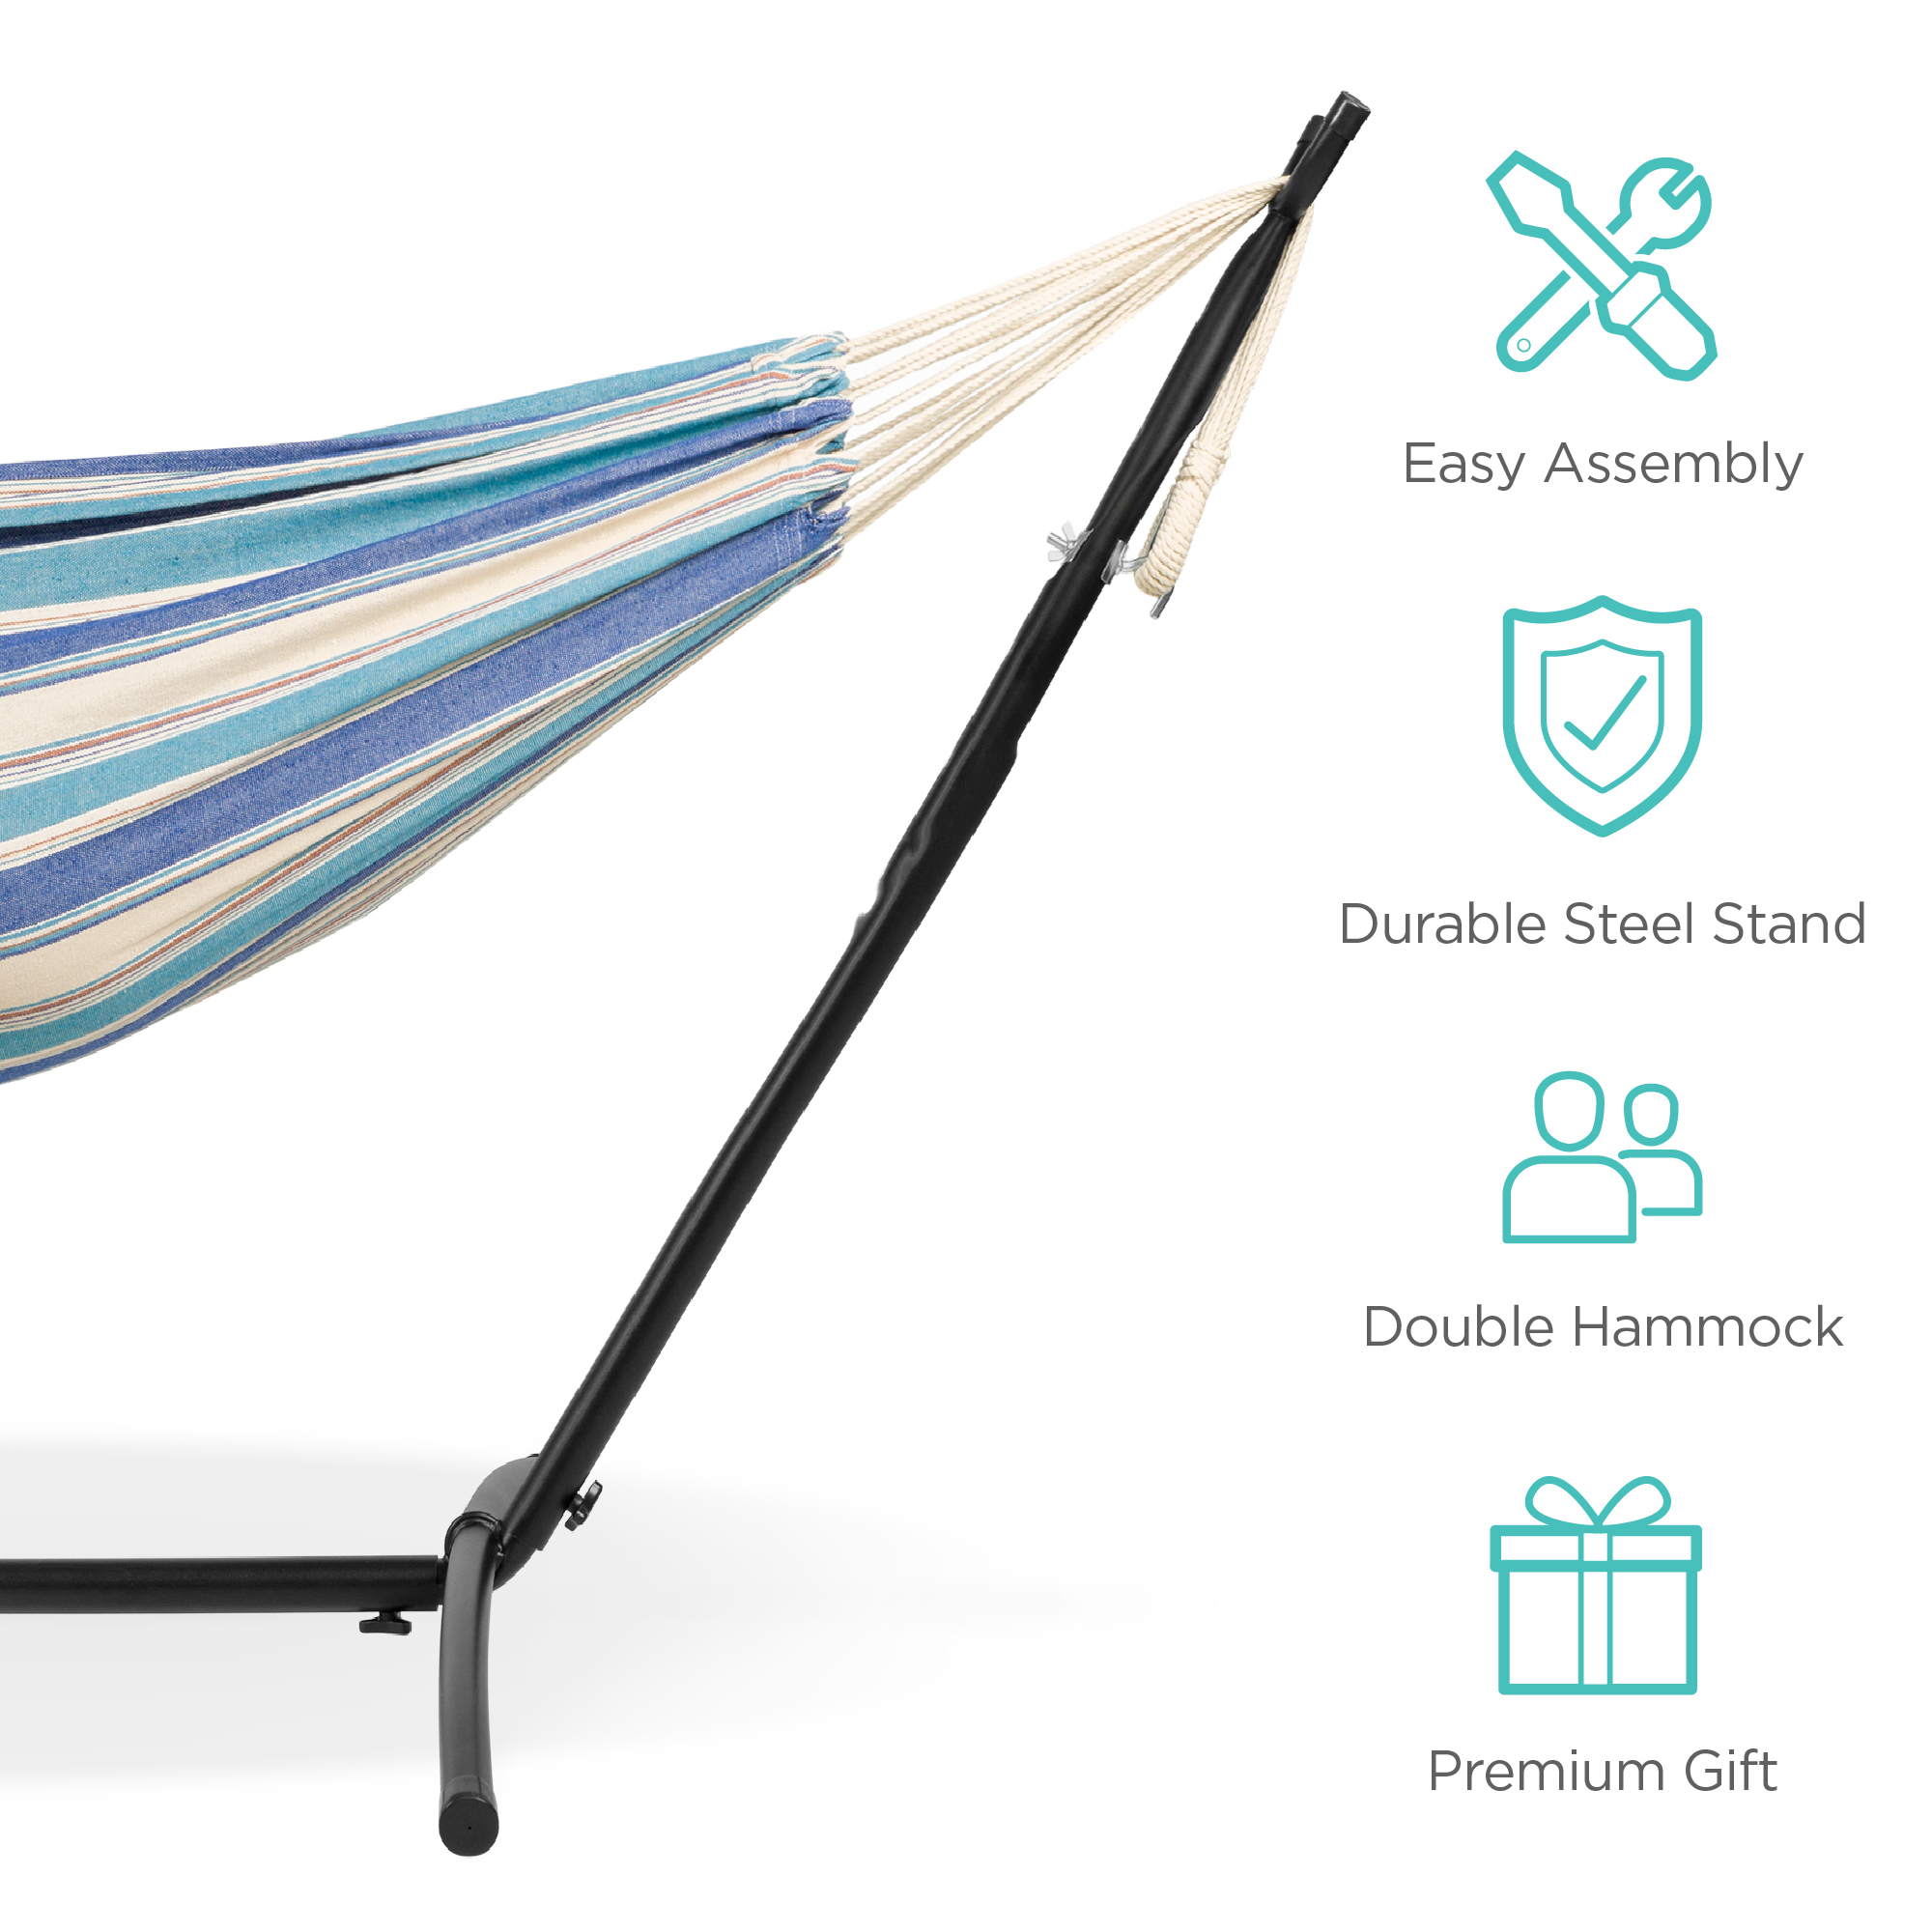 Best Choice Products 2-Person Brazilian-Style Cotton Double Hammock with Stand Set w/ Carrying Bag - Ocean - image 5 of 7